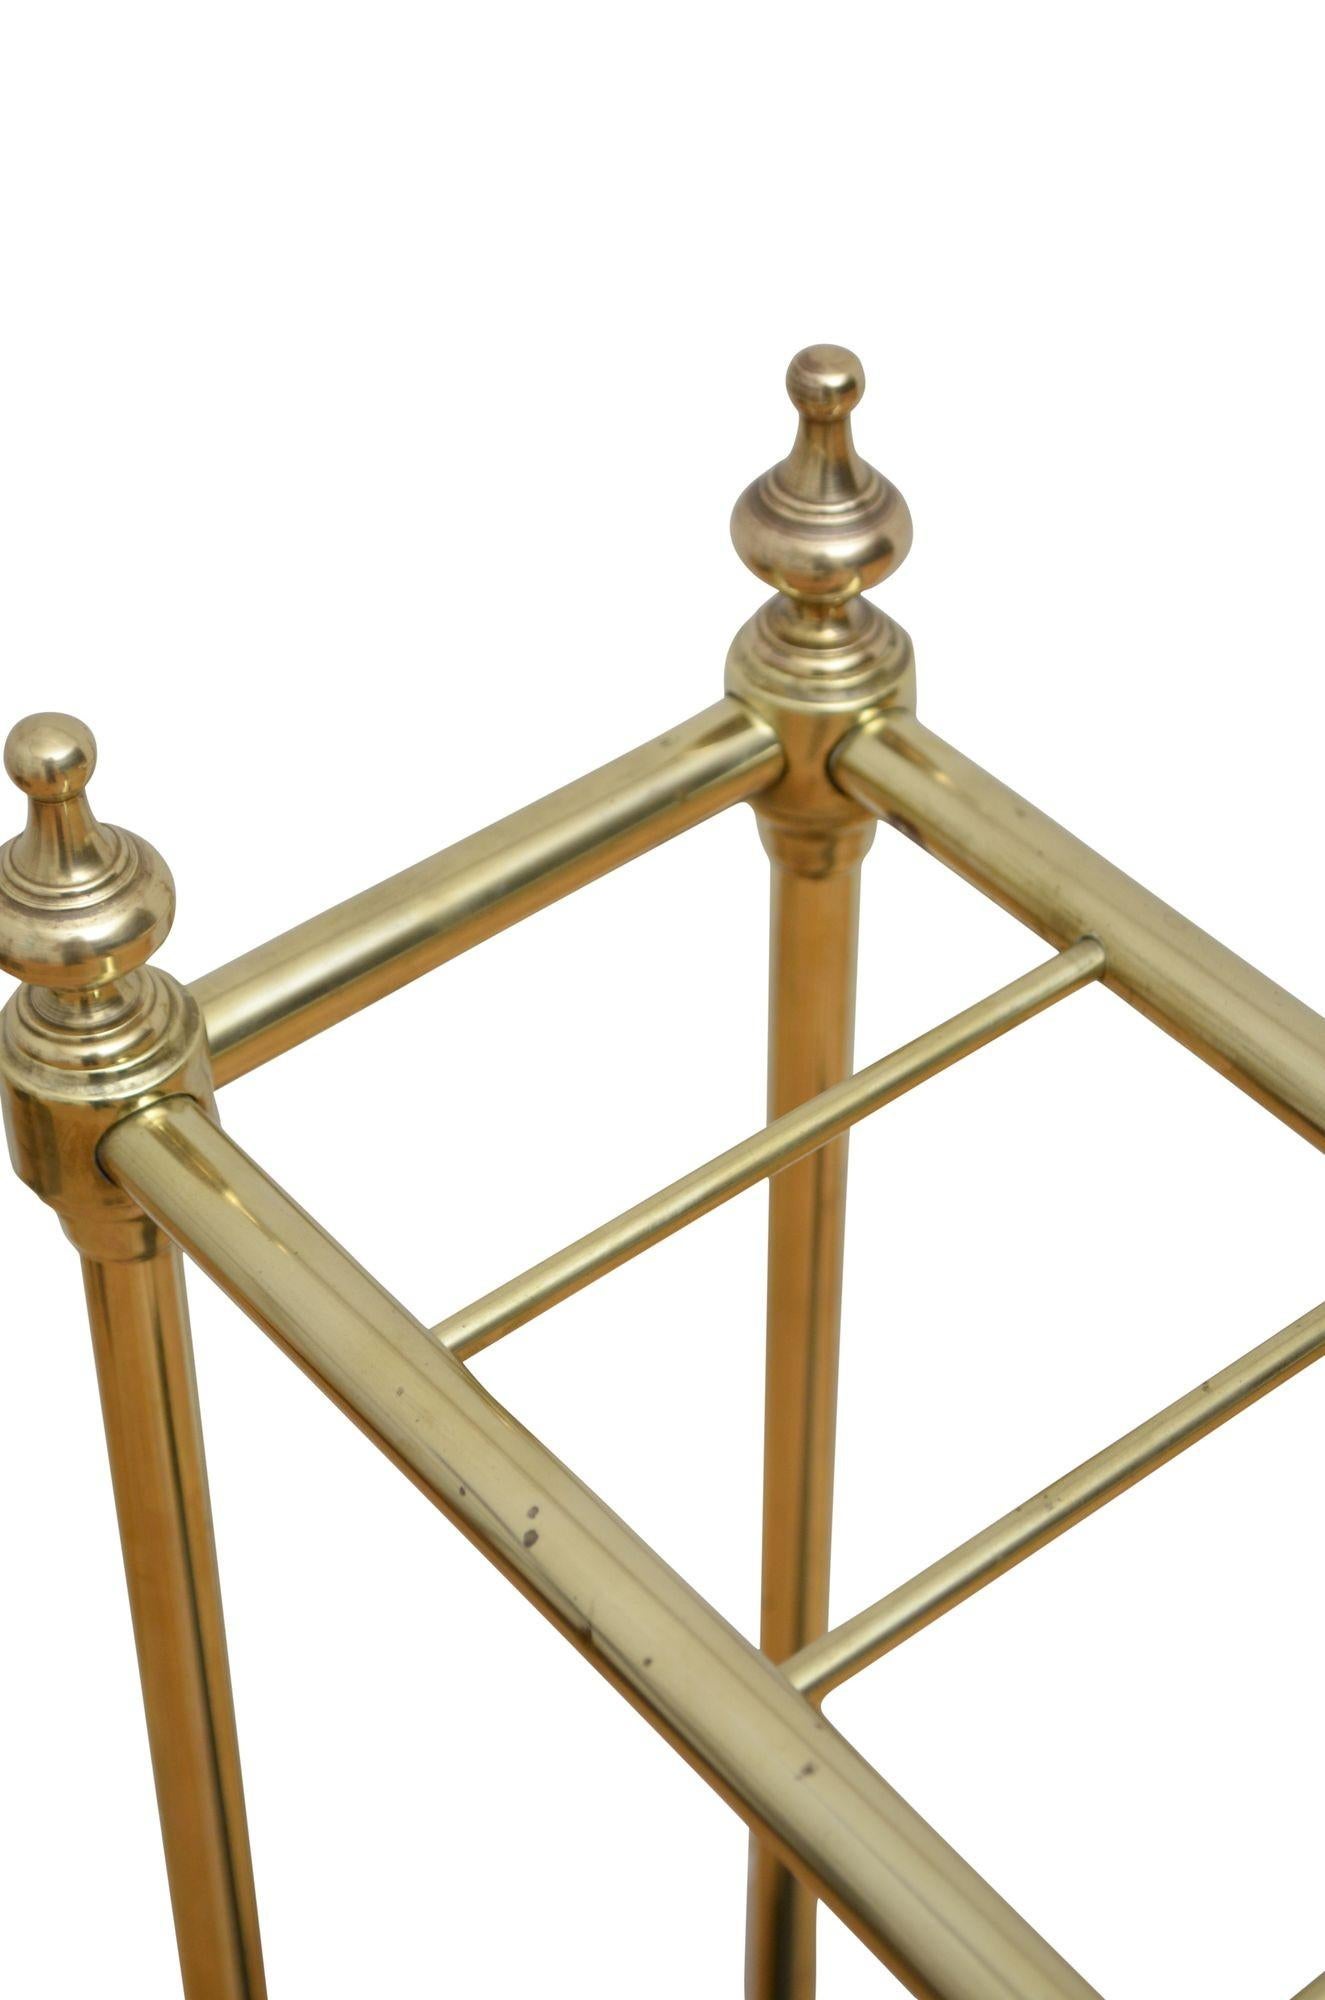 K0258 An English umbrella stand in brass with six divisions flanked by decorative finials and cast iron drip tray with dogtooth decoration to front and sides.. This antique umbrella stand retains its original lacquer, patina and character, all in